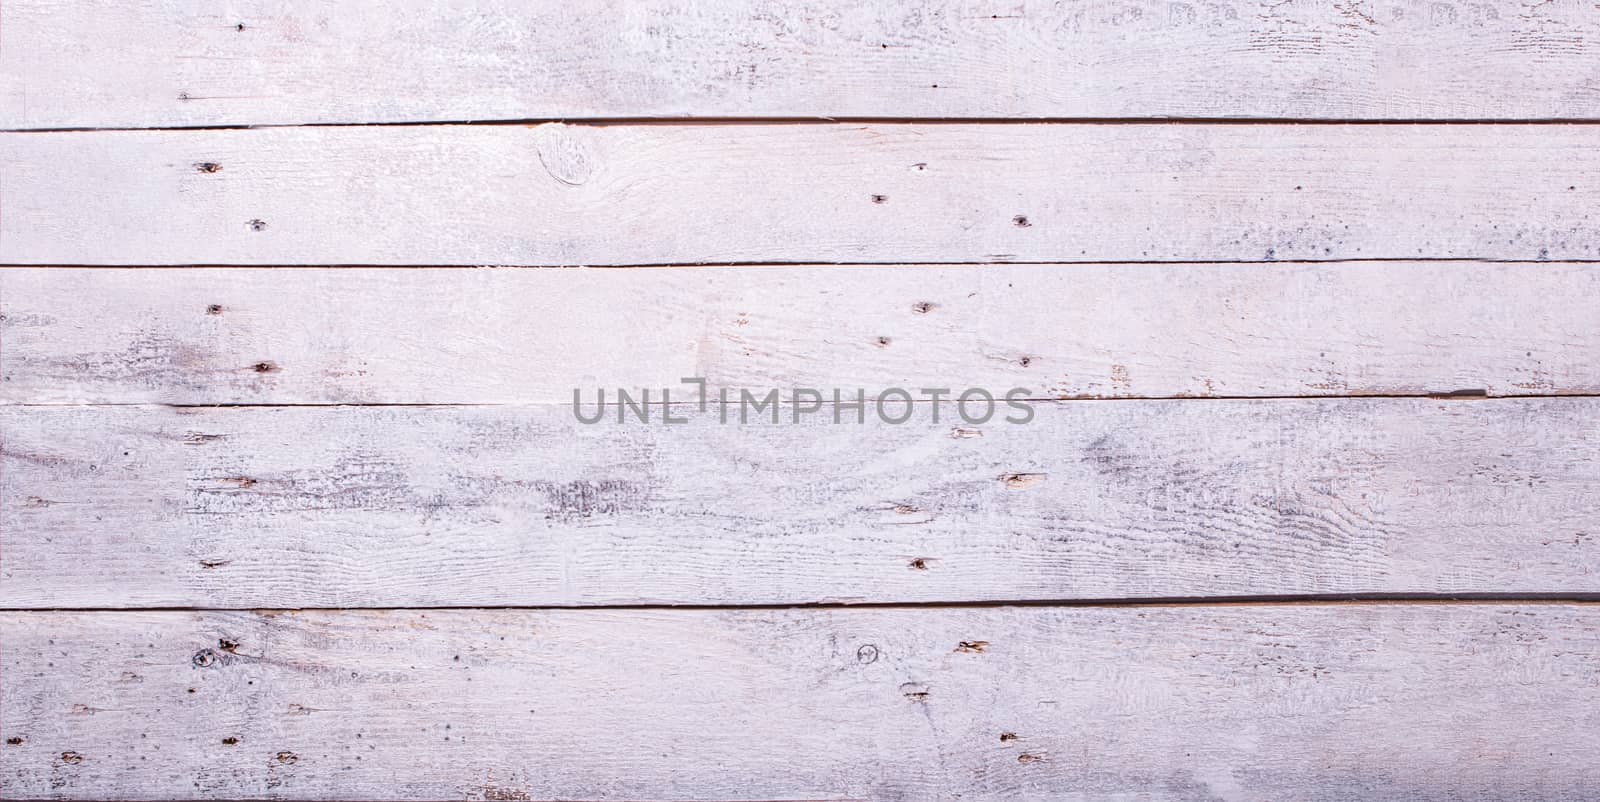 rustic, construction, row, organic, lumber, aged, wooden background, space, view, gray, top, wood texture, color, pattern, parquet, decor, hardwood, carpentry, abstract, grungy, plank, board, wooden, vintage, background, material, structure, decorative, texture, old, surface, natural, backdrop, grunge, table, panel, timber, wood, textured, white, rough, wall, retro, nature, wallpaper, striped, floor, design, light, desk